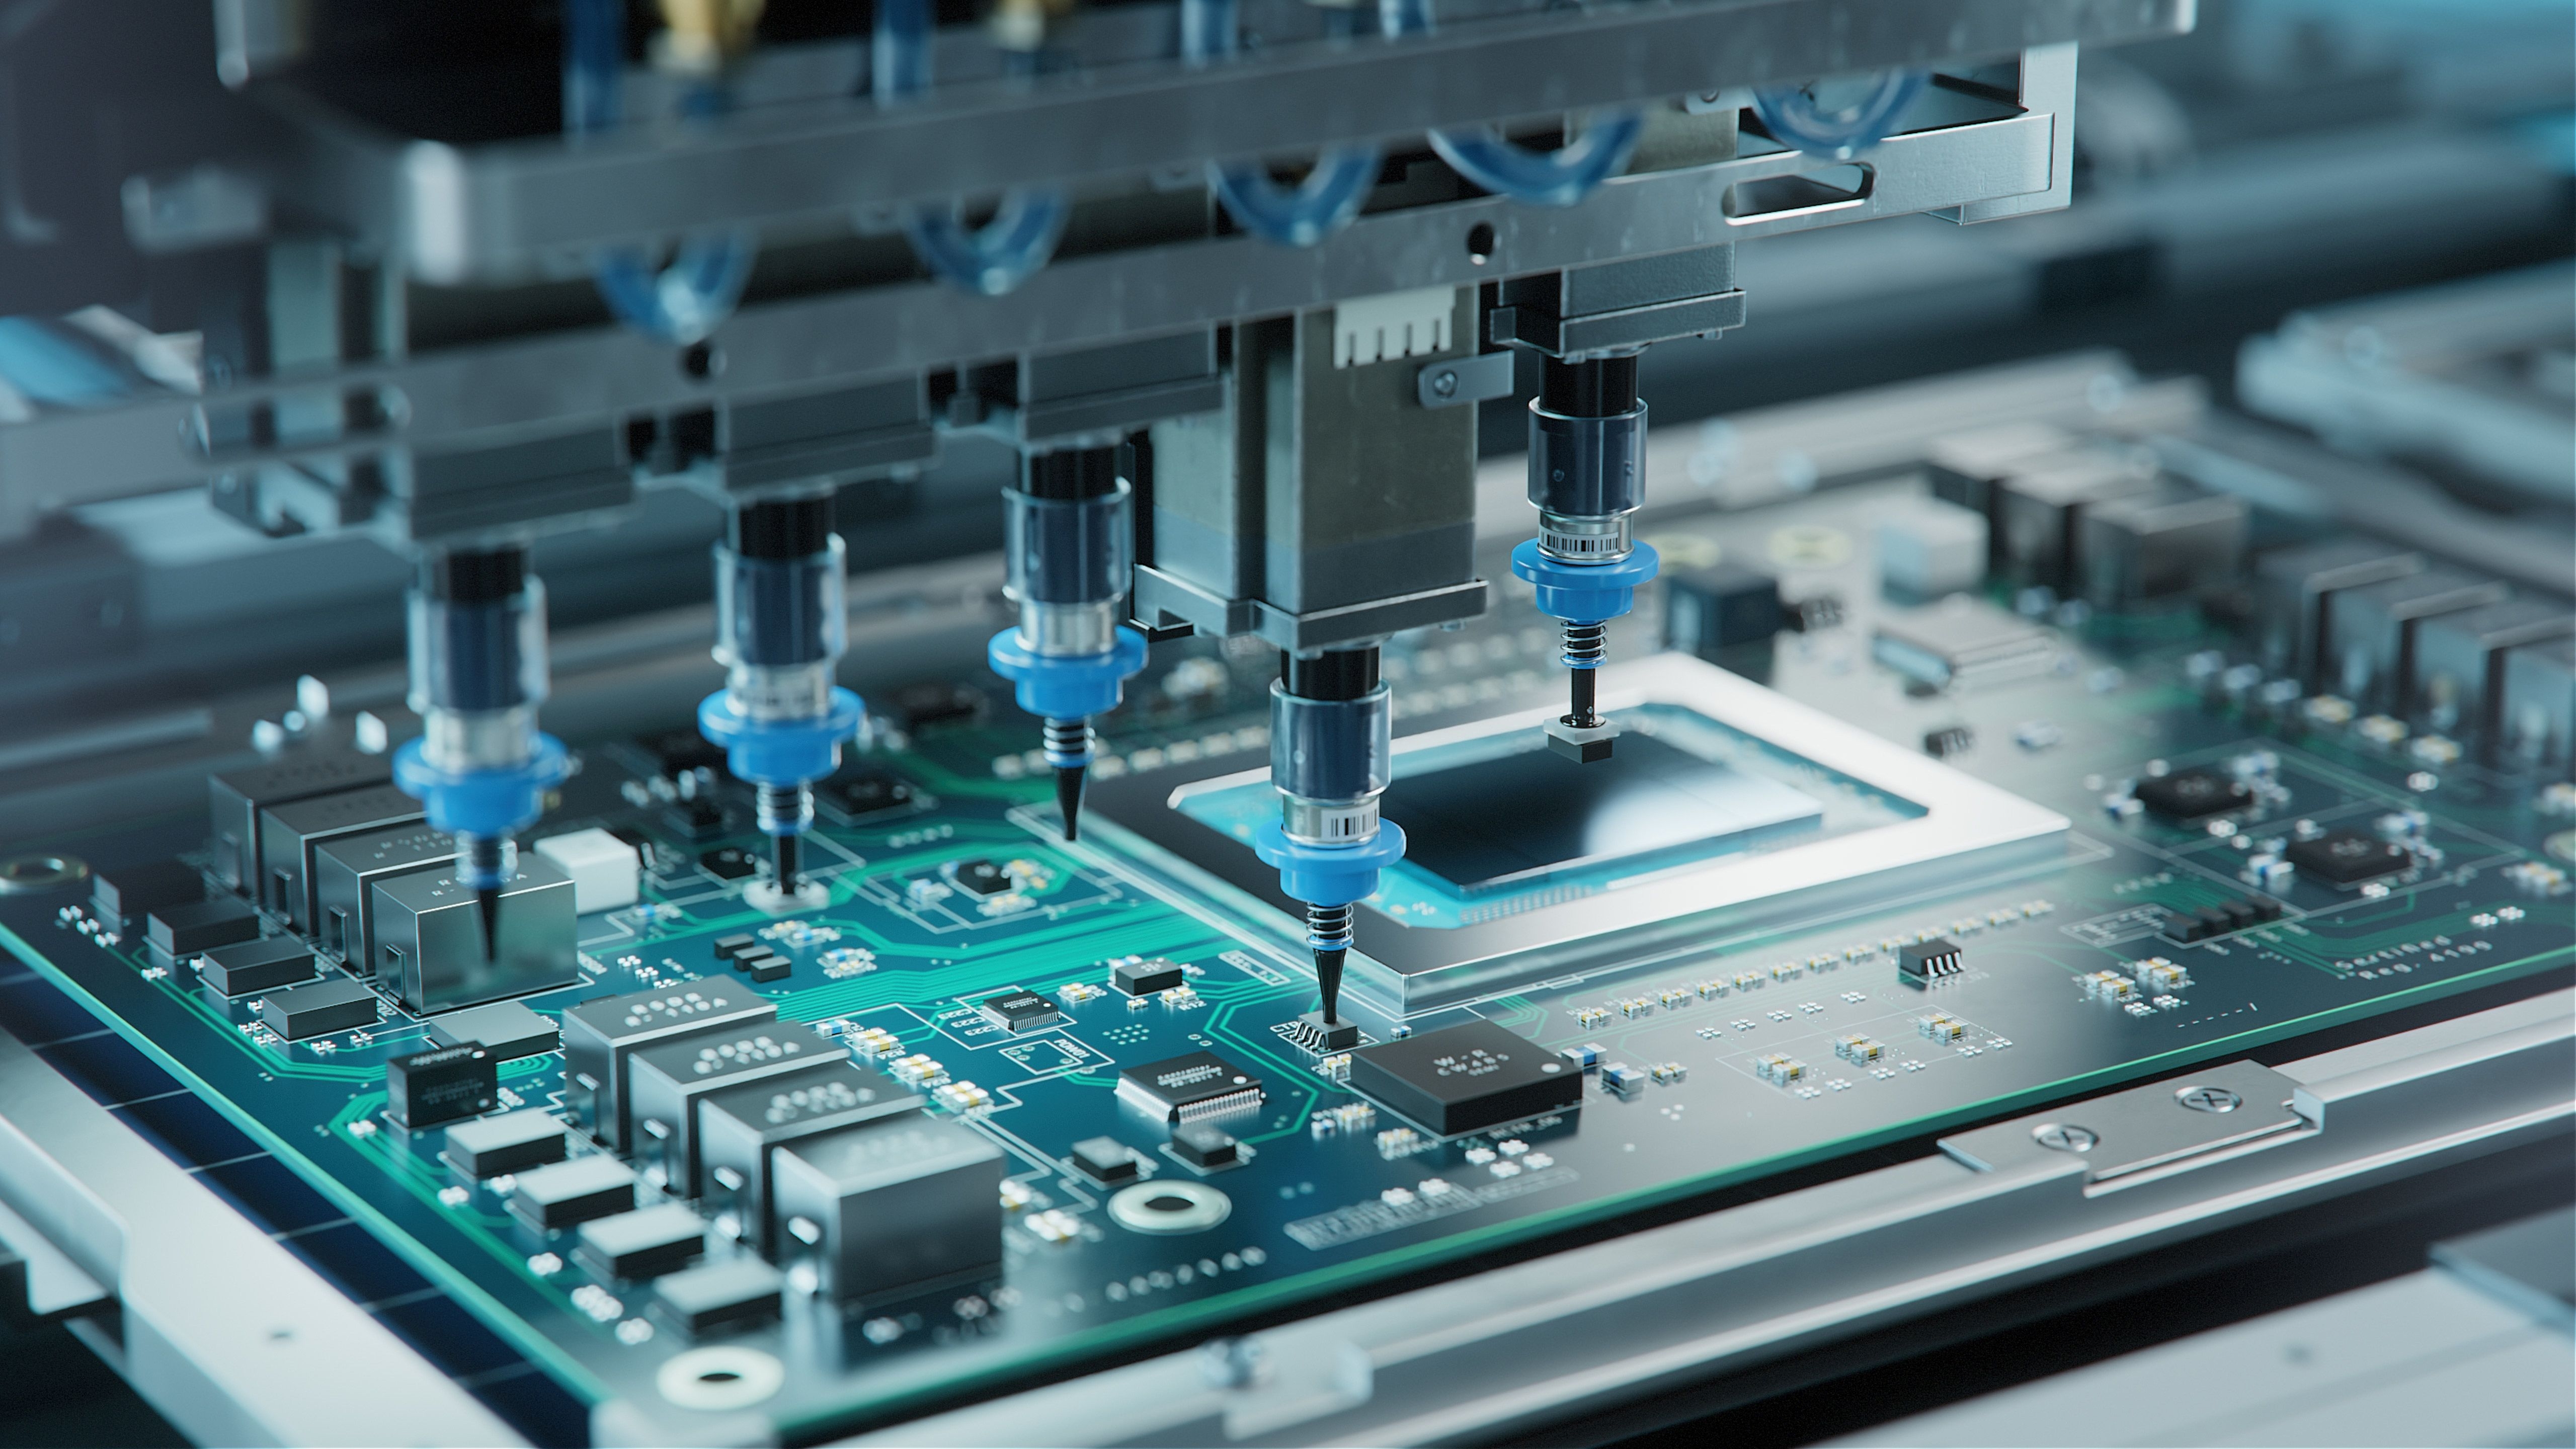 What is the difference between PCB and PCBA?